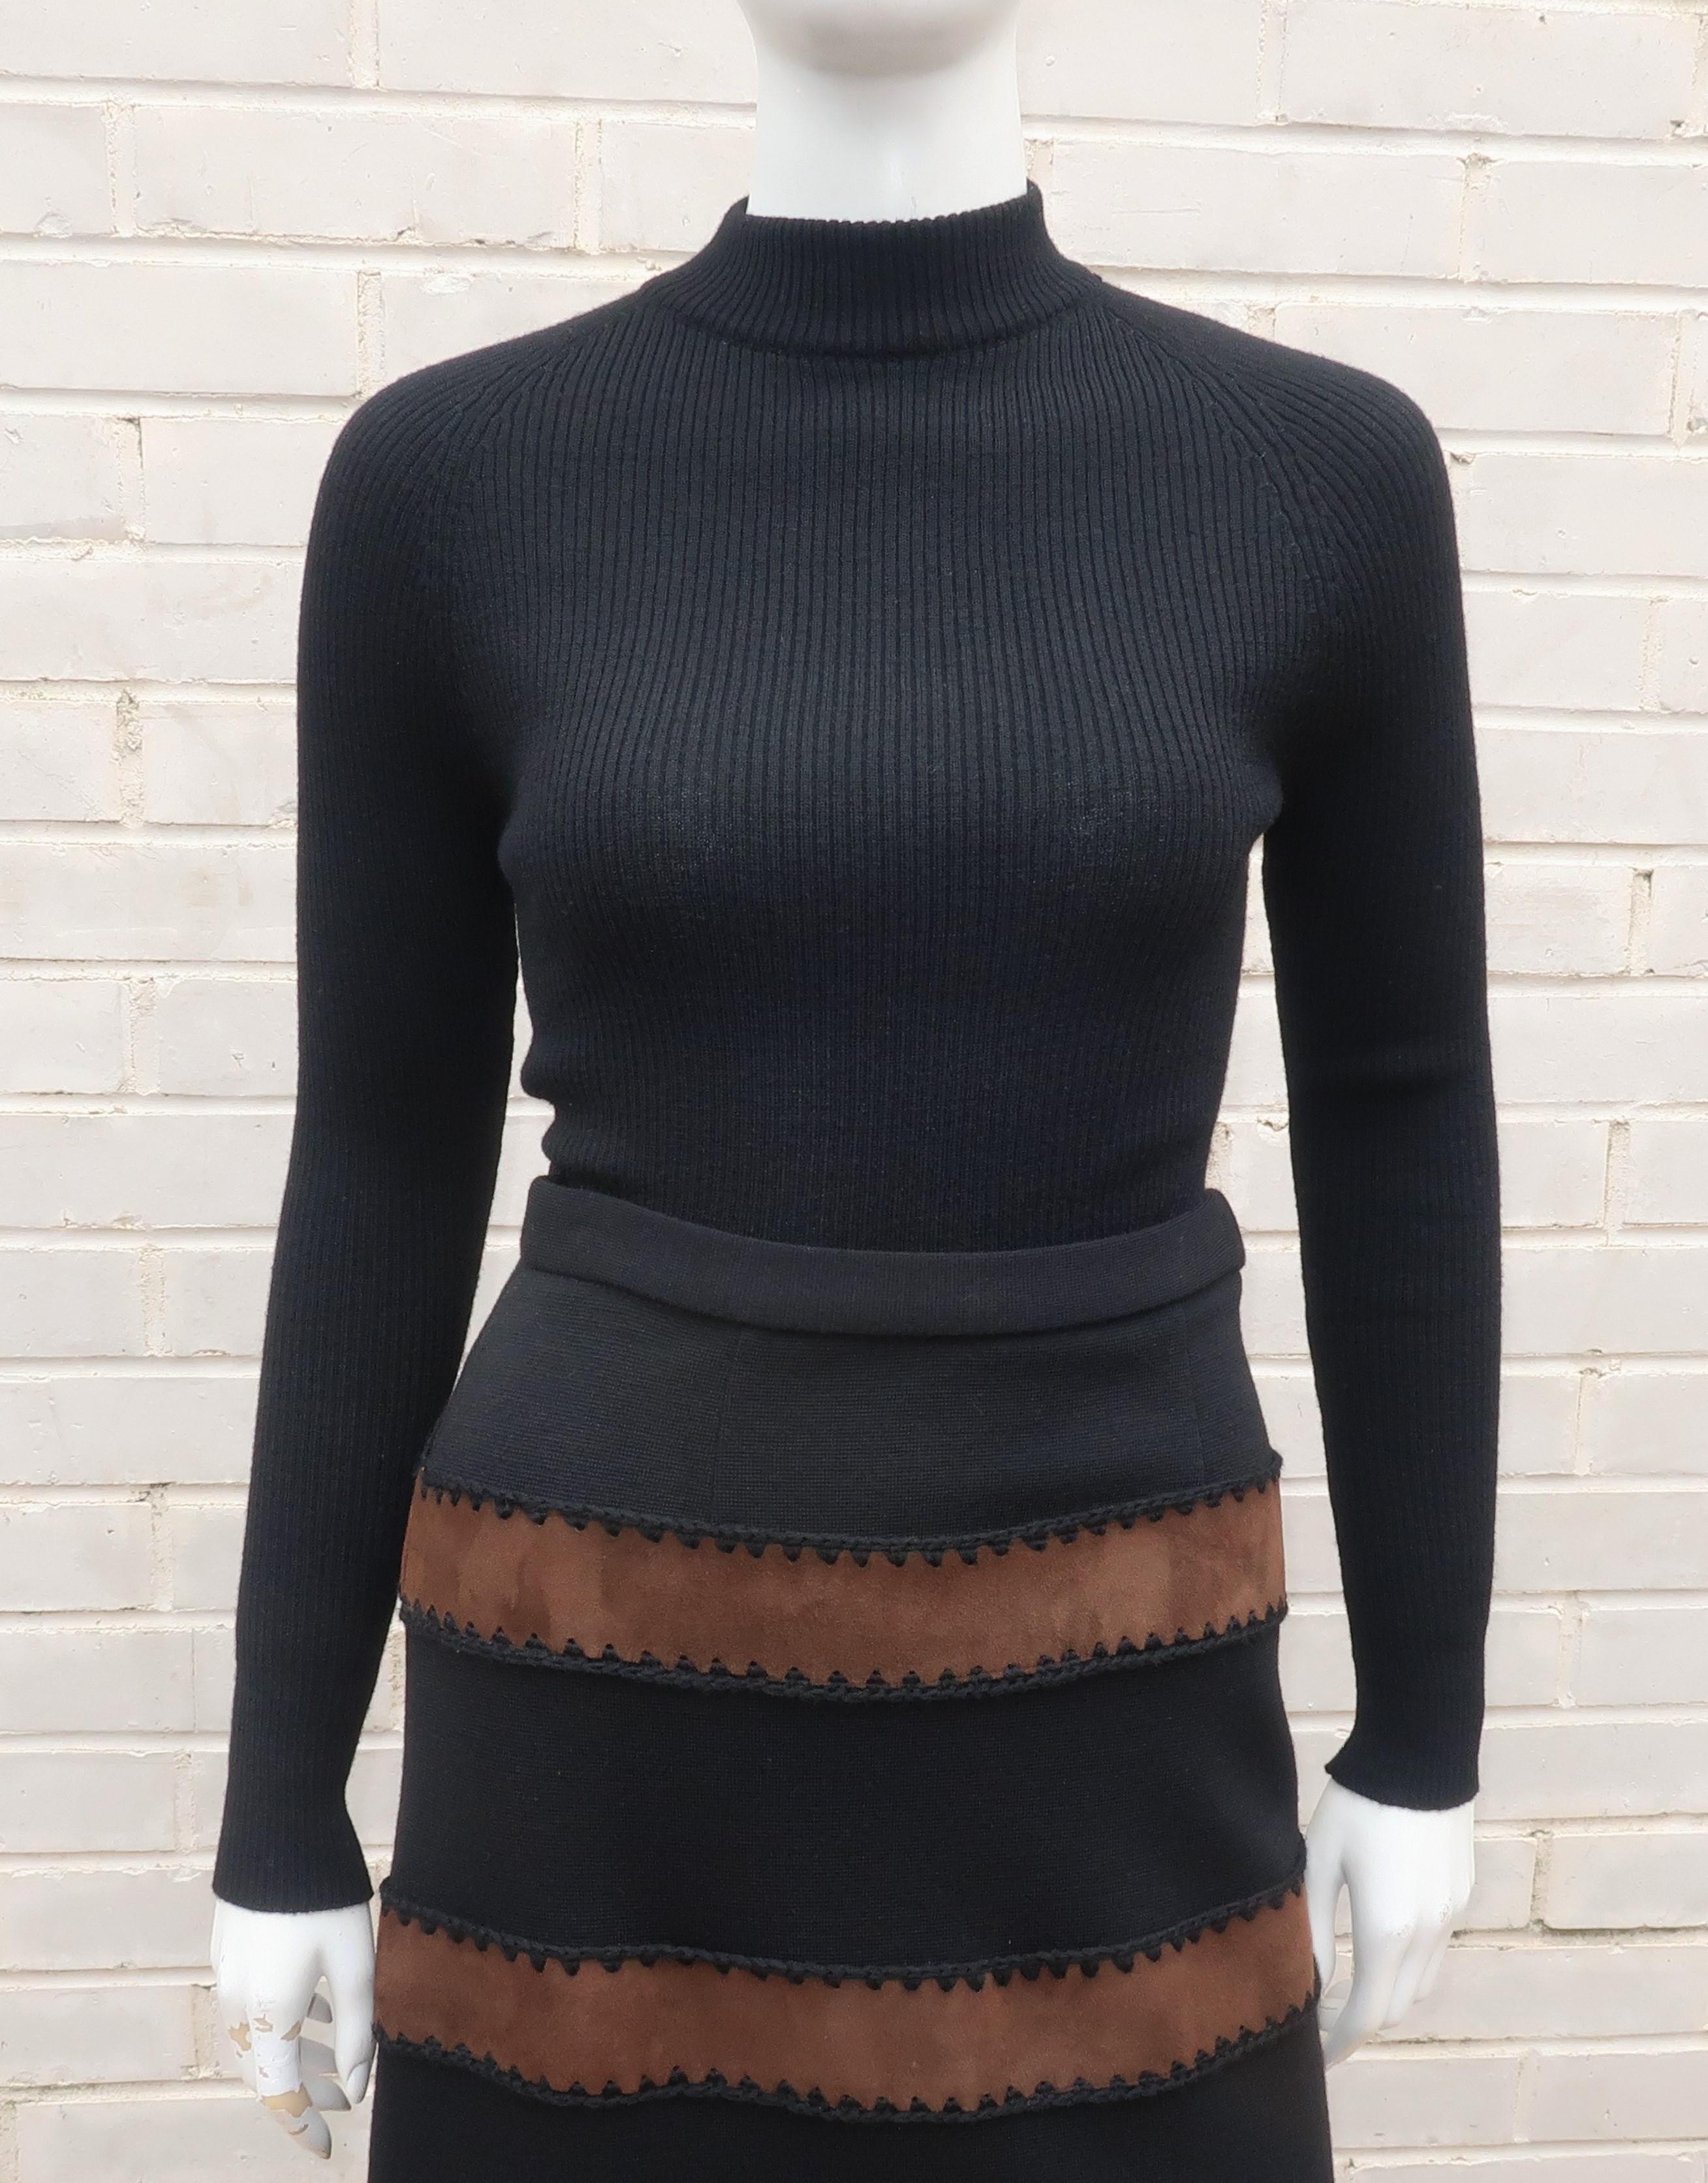 A two piece wool knit ensemble consisting of a skinny ribbed turtleneck top and a maxi skirt embellished with brown suede bands.  The sweater zips at the back and the skirt zips and hooks at the side.  The crochet style stitching at the suede gives